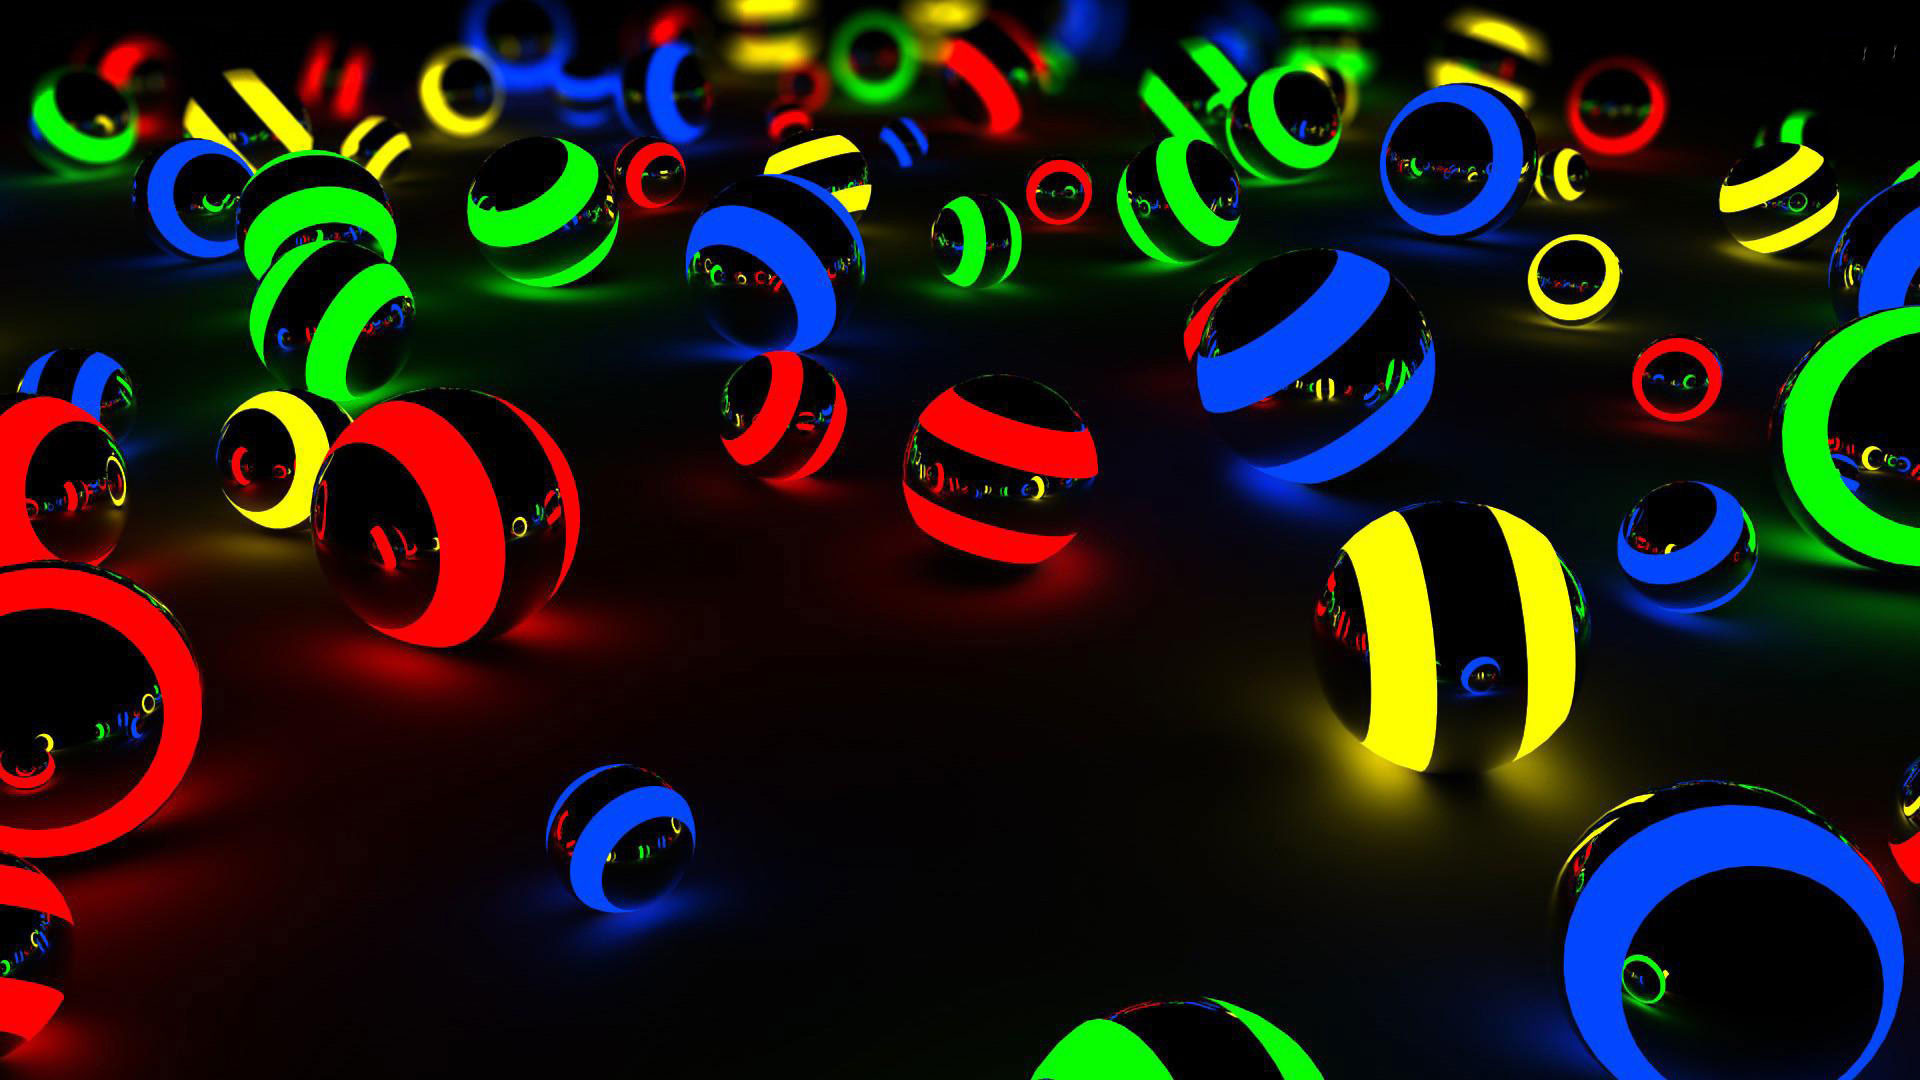 1920x1080 ... Colorful 3D Multi-Color Glowing Mushrooms Wallpaper | HD 3D and  Abstract ... Neon Balls ...